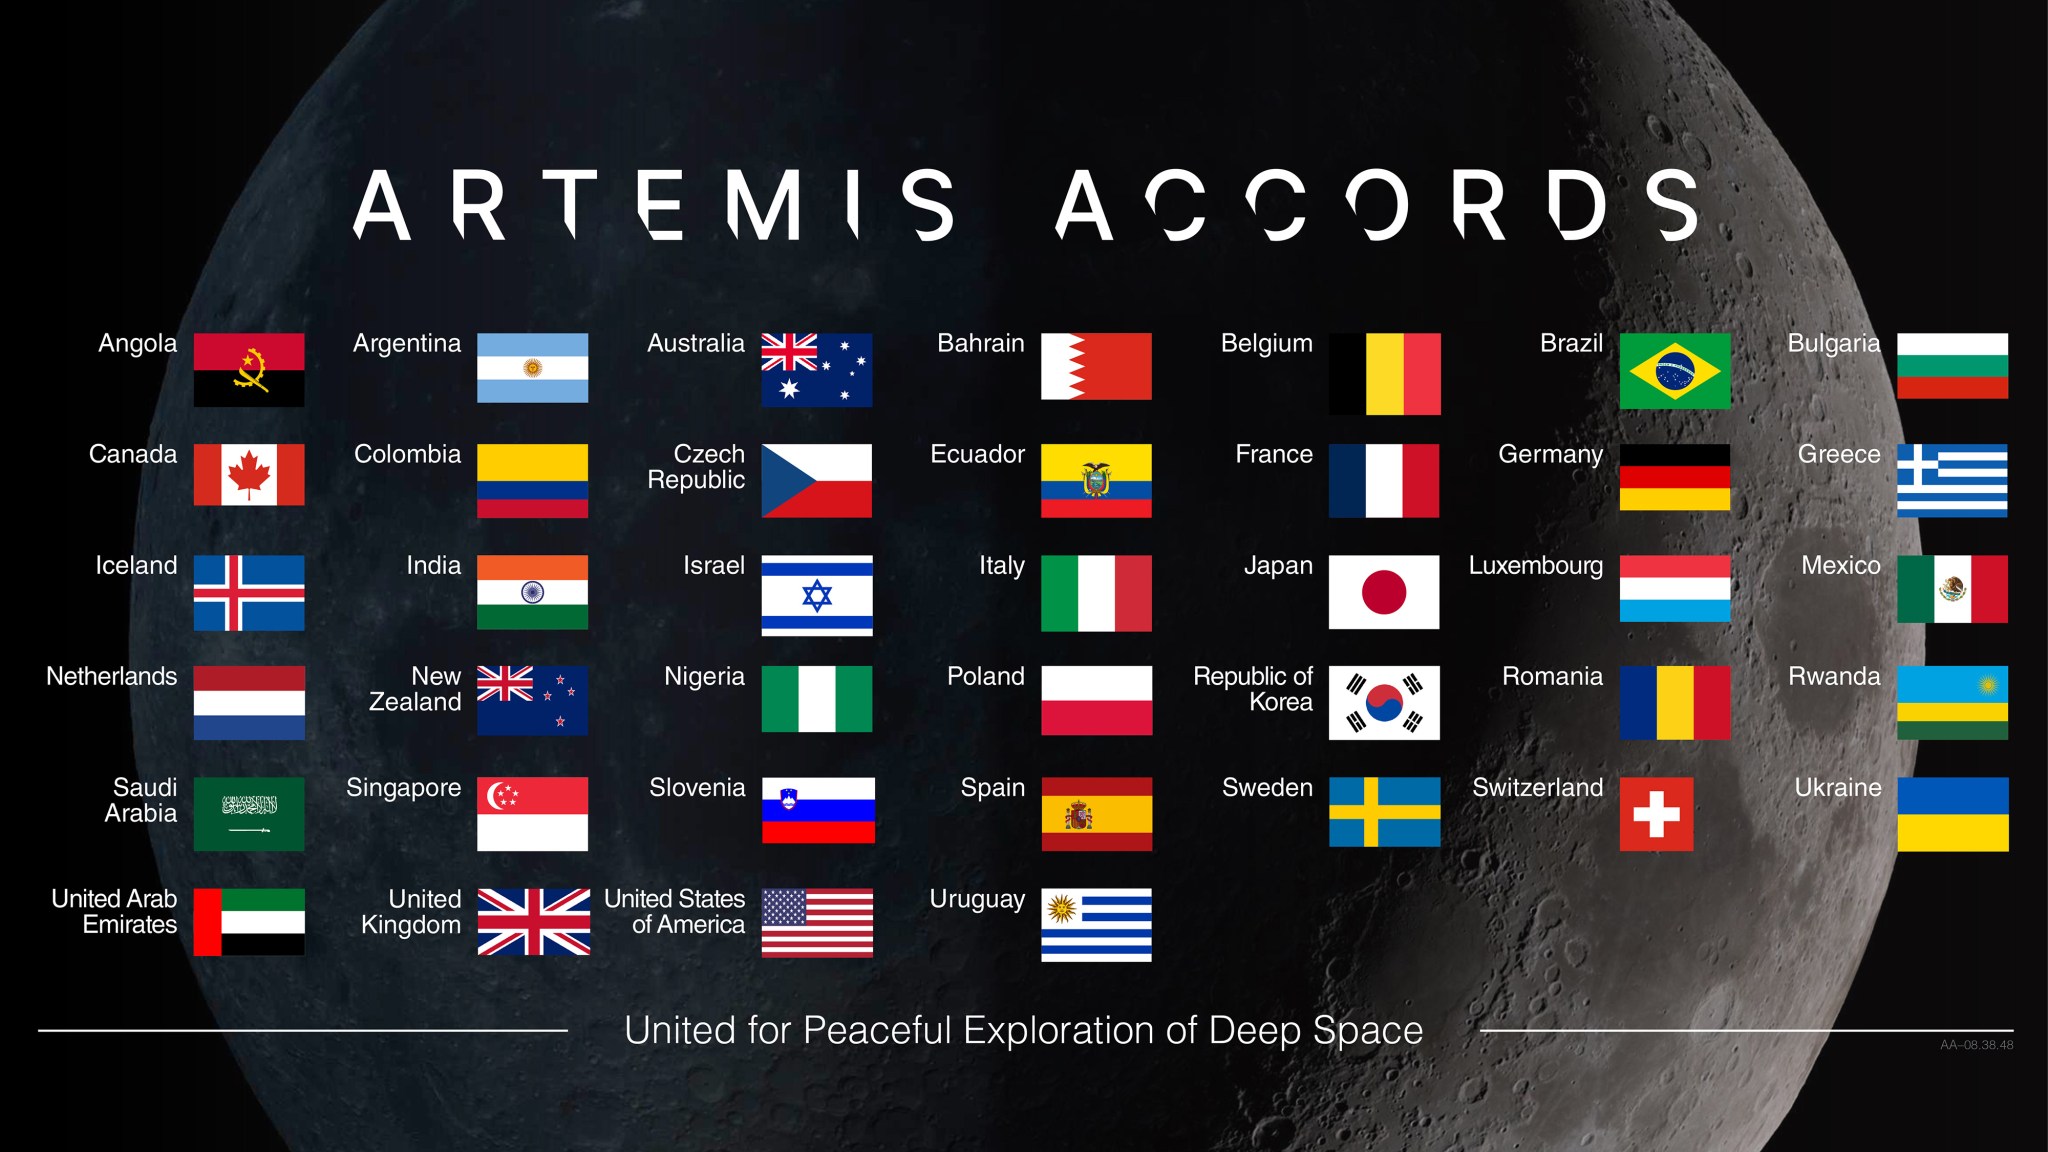 This graphic displays the flags of the nations that have signed the Artemis Accords against a background image of the Moon in the blackness of space. The graphic is titled “Artemis Accords.” The words, “United for Peaceful Exploration of Deep Space” appear on the bottom of the image.